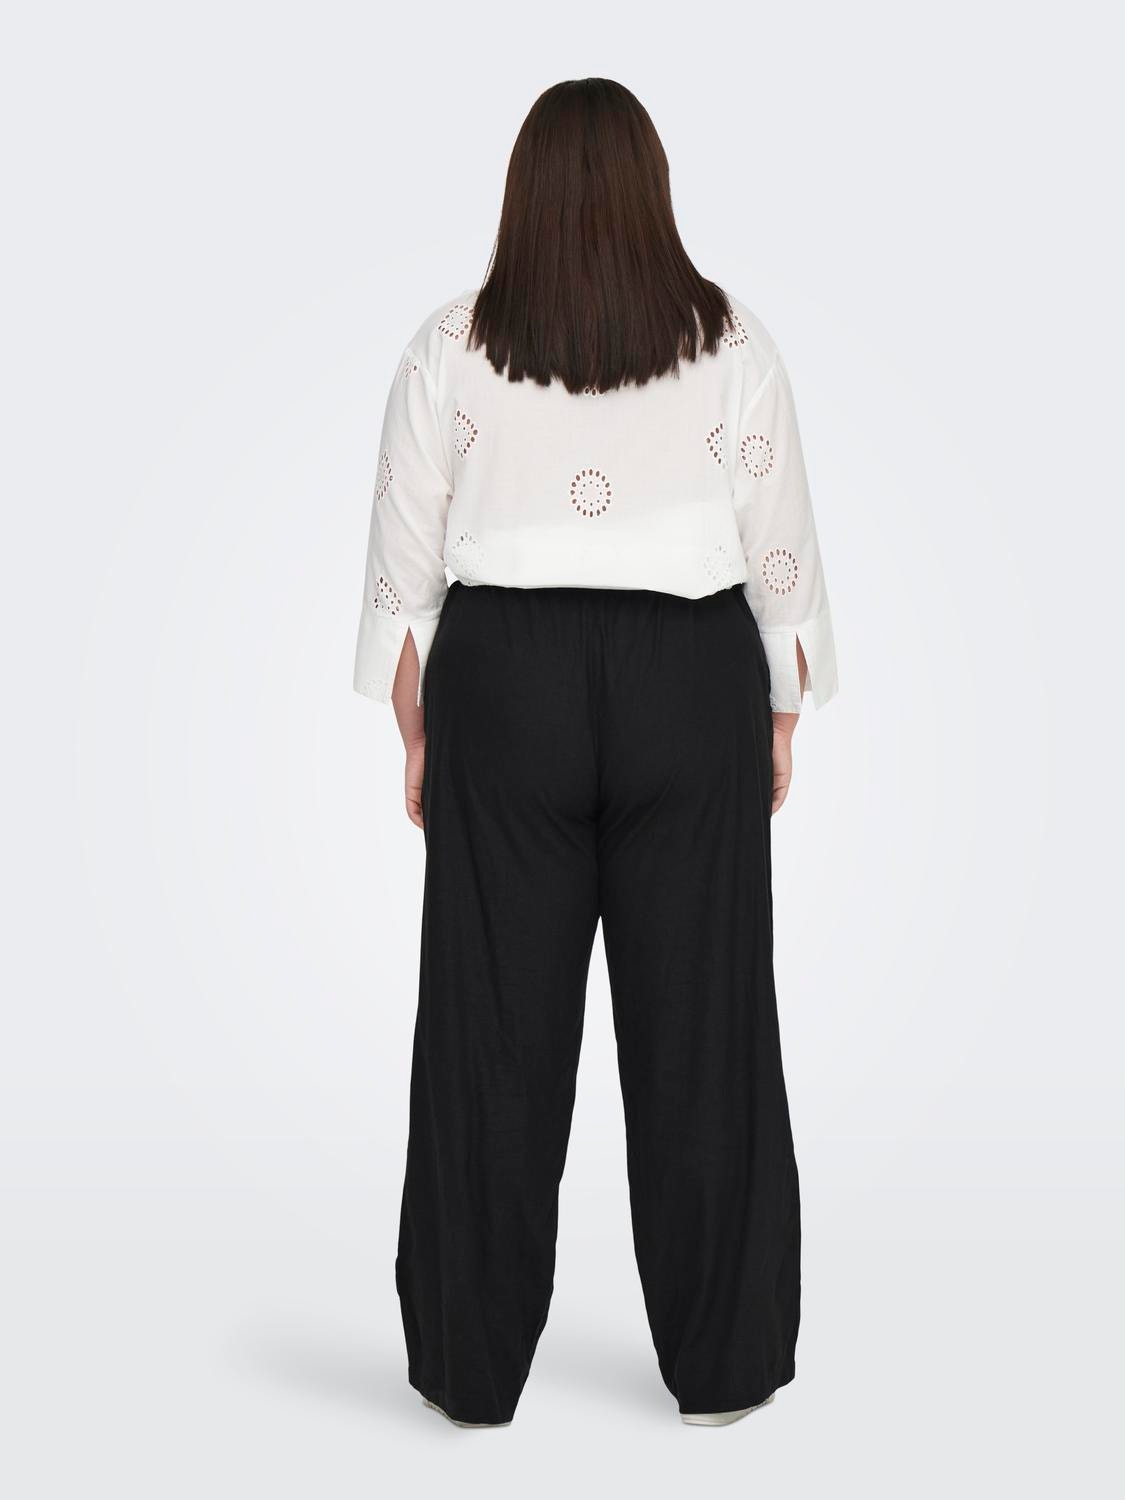 ONLY Curvy linen trousers -Black - 15289359